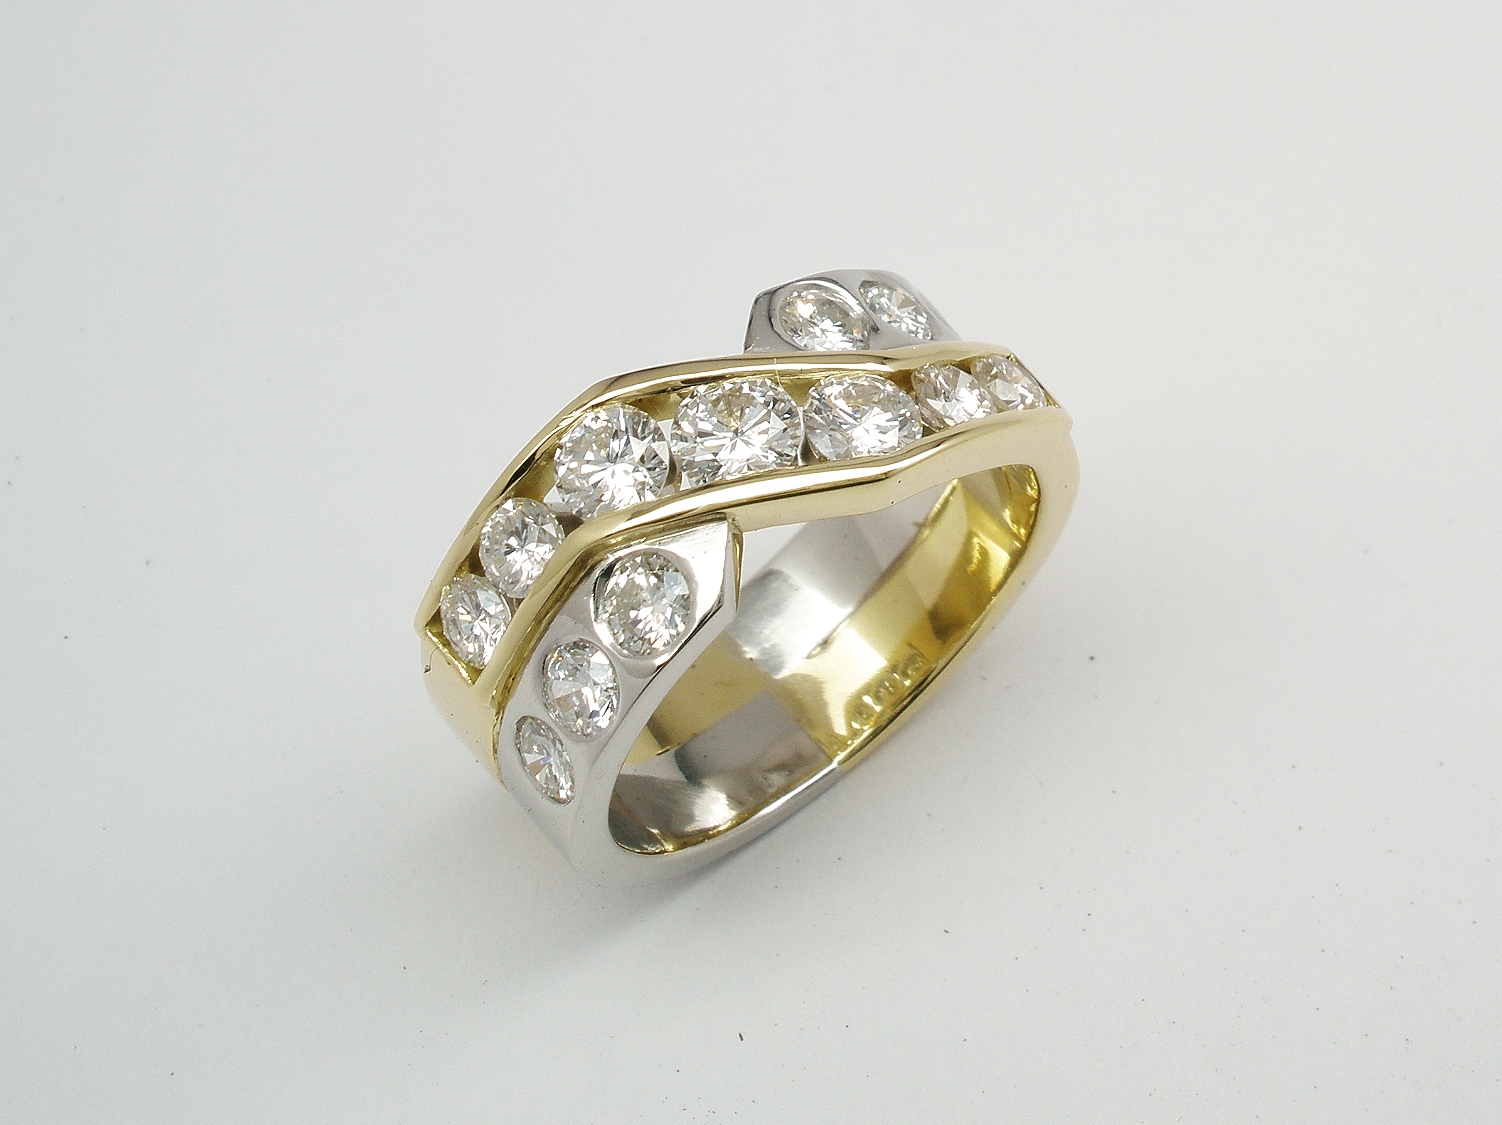 A 13 stone diamond broad cross-over style ring with 7 channel set diamonds and 6 flush set & mounted in 18ct. yellow gold and platinum